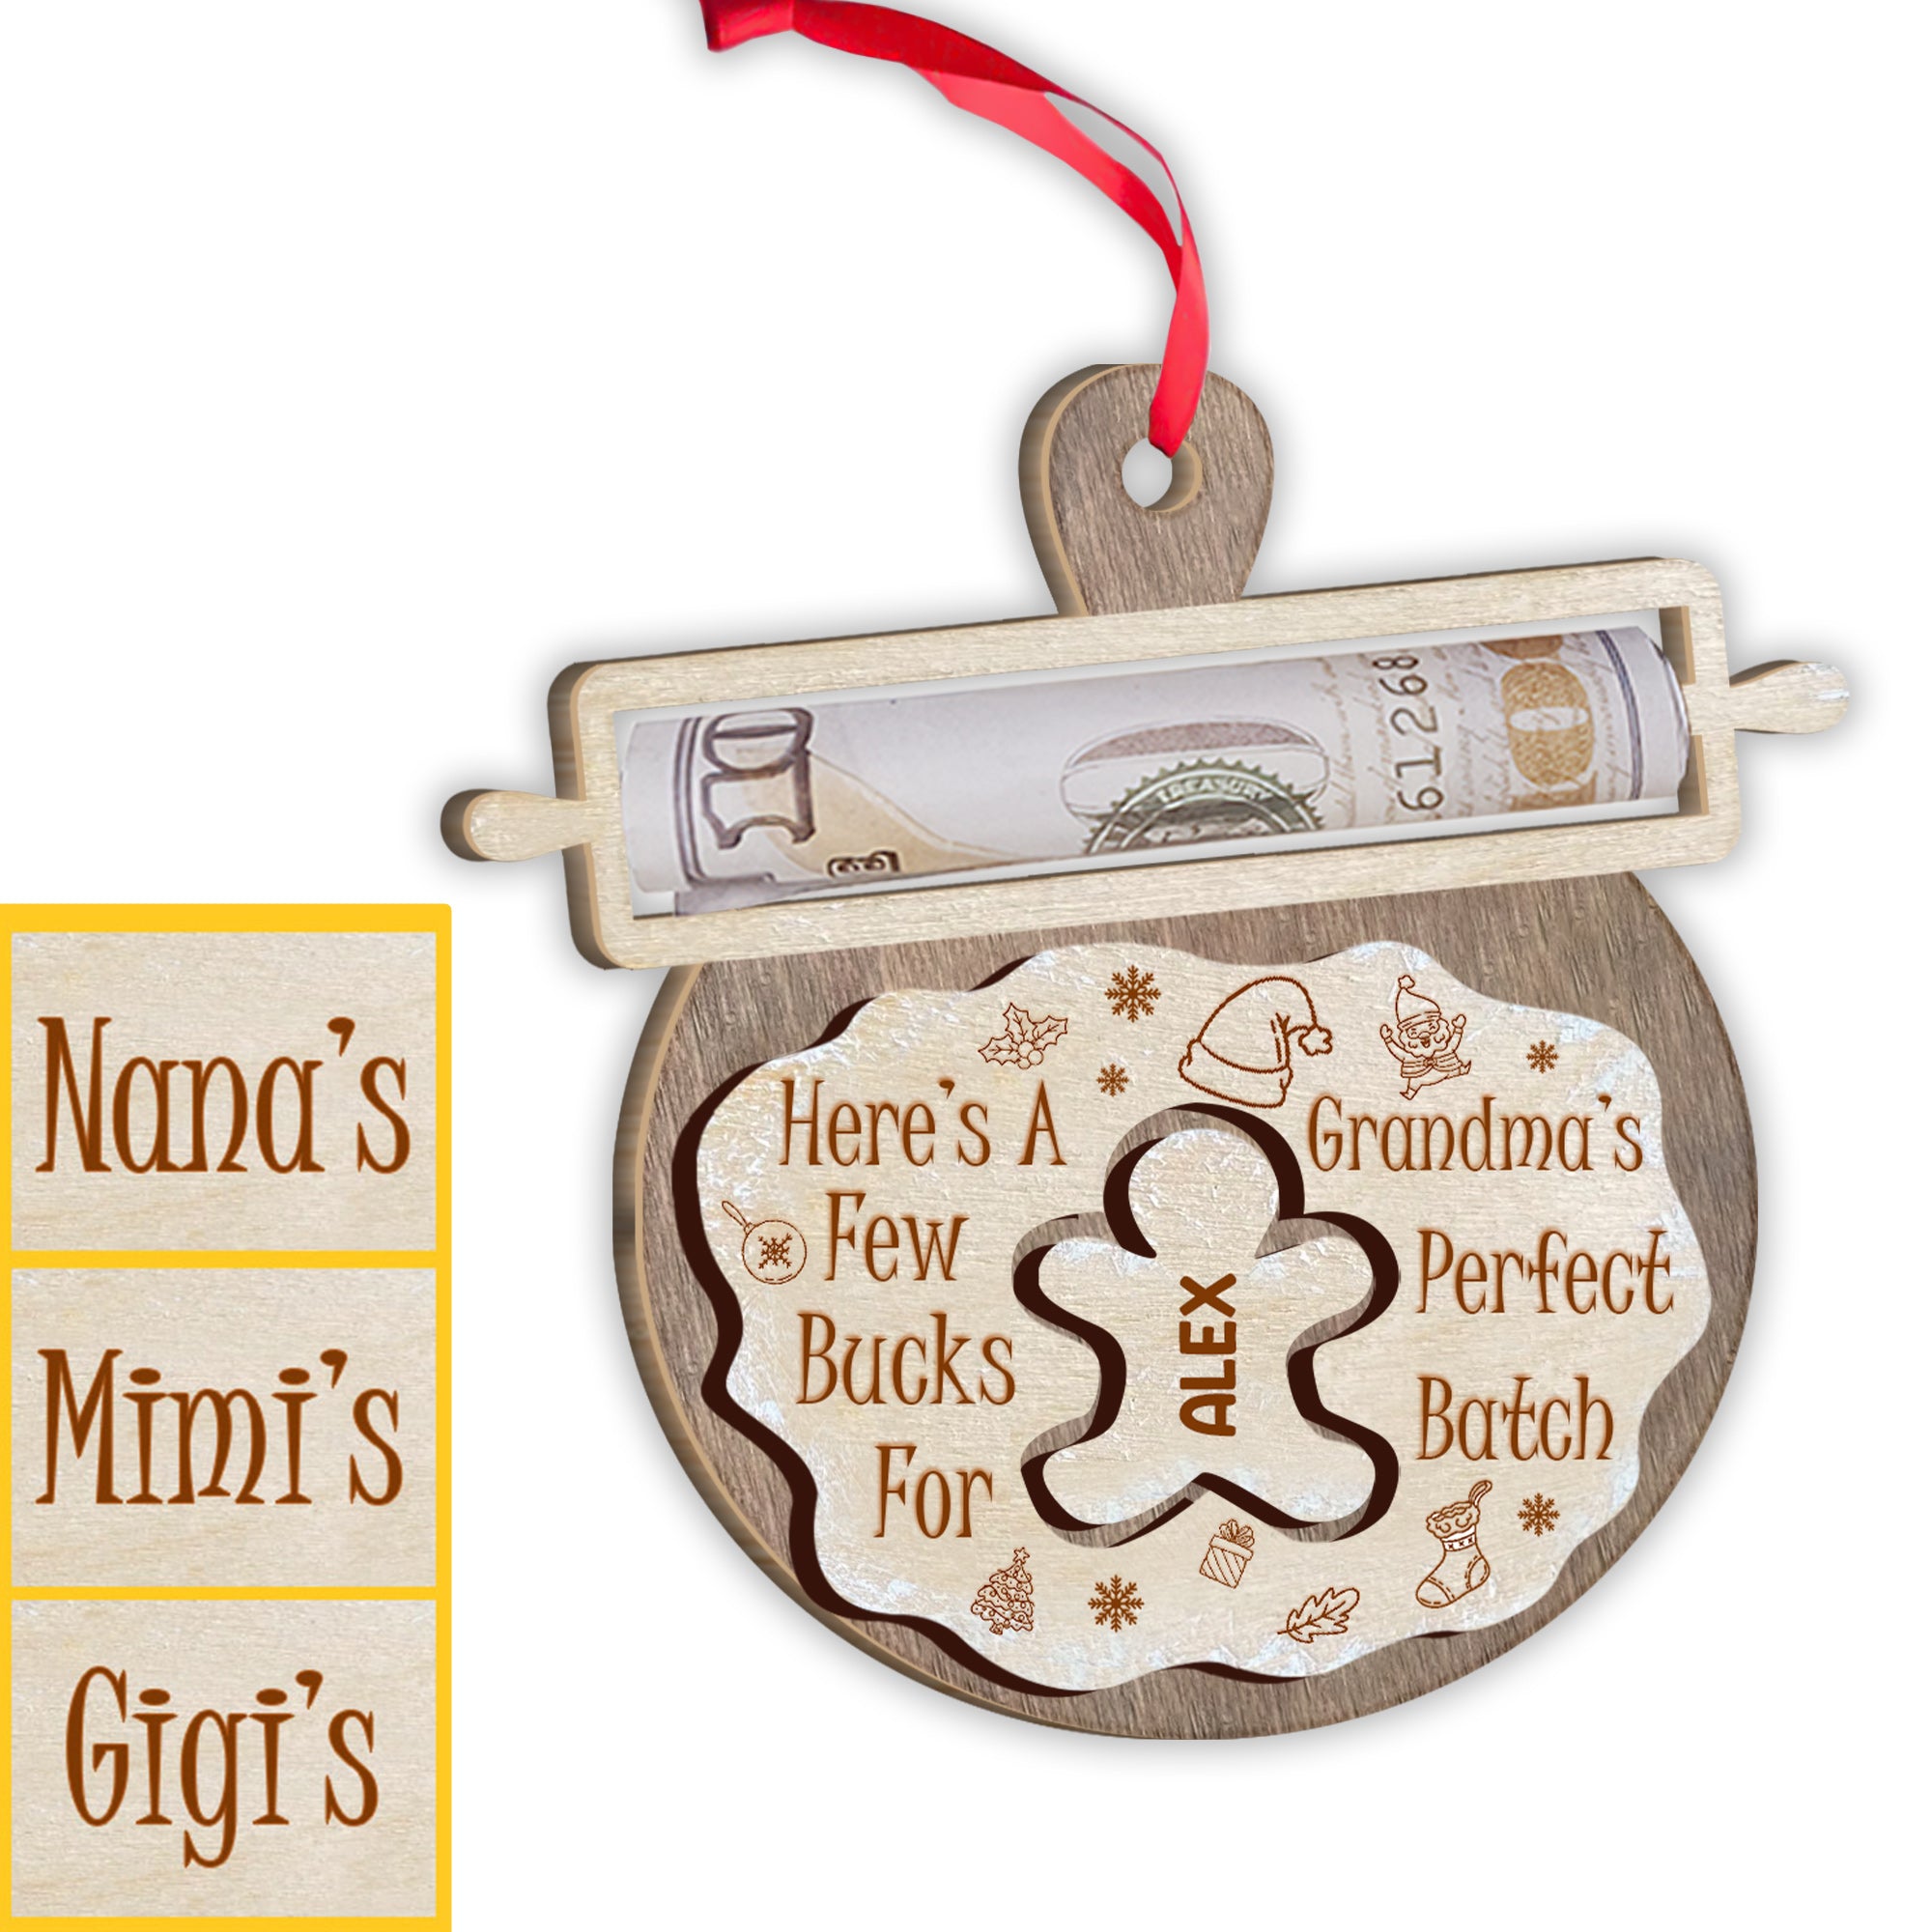 Here's A Few Bucks For Grandma's Perfect Batch - Gift for grandma, daughter, son, granddaughter, grandson - Personalized 2 Layered Piece Ornament